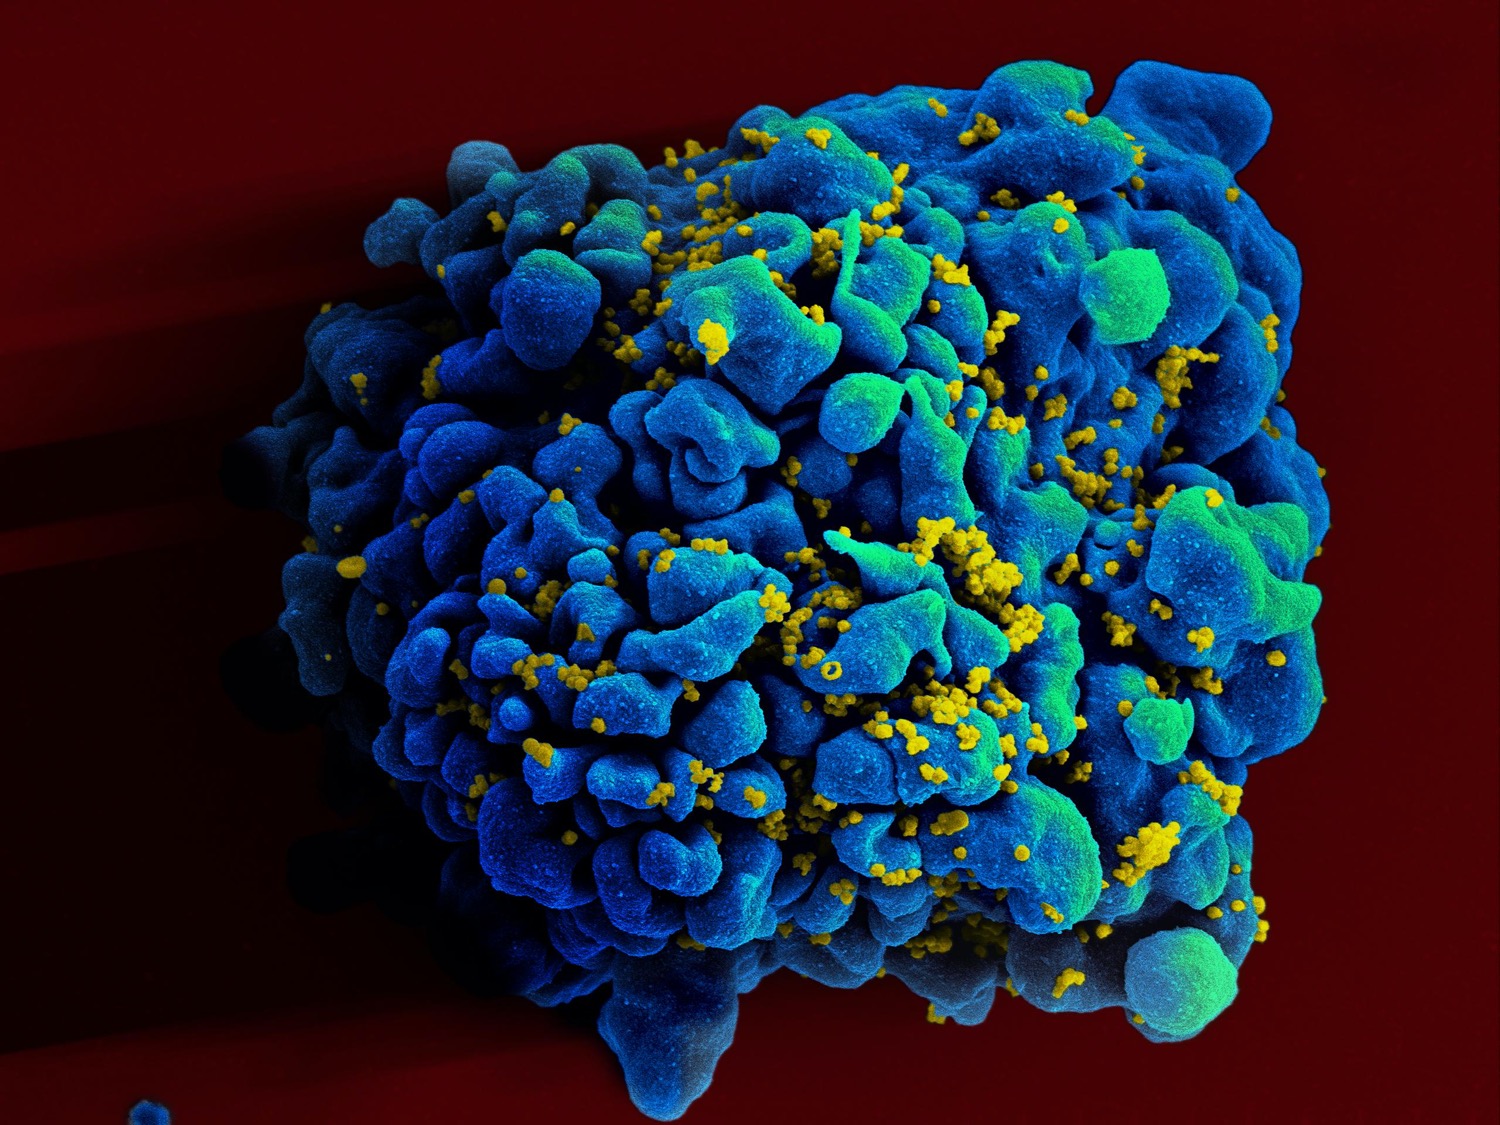 a blue a bumpy cell with specks of yellow, representing hiv